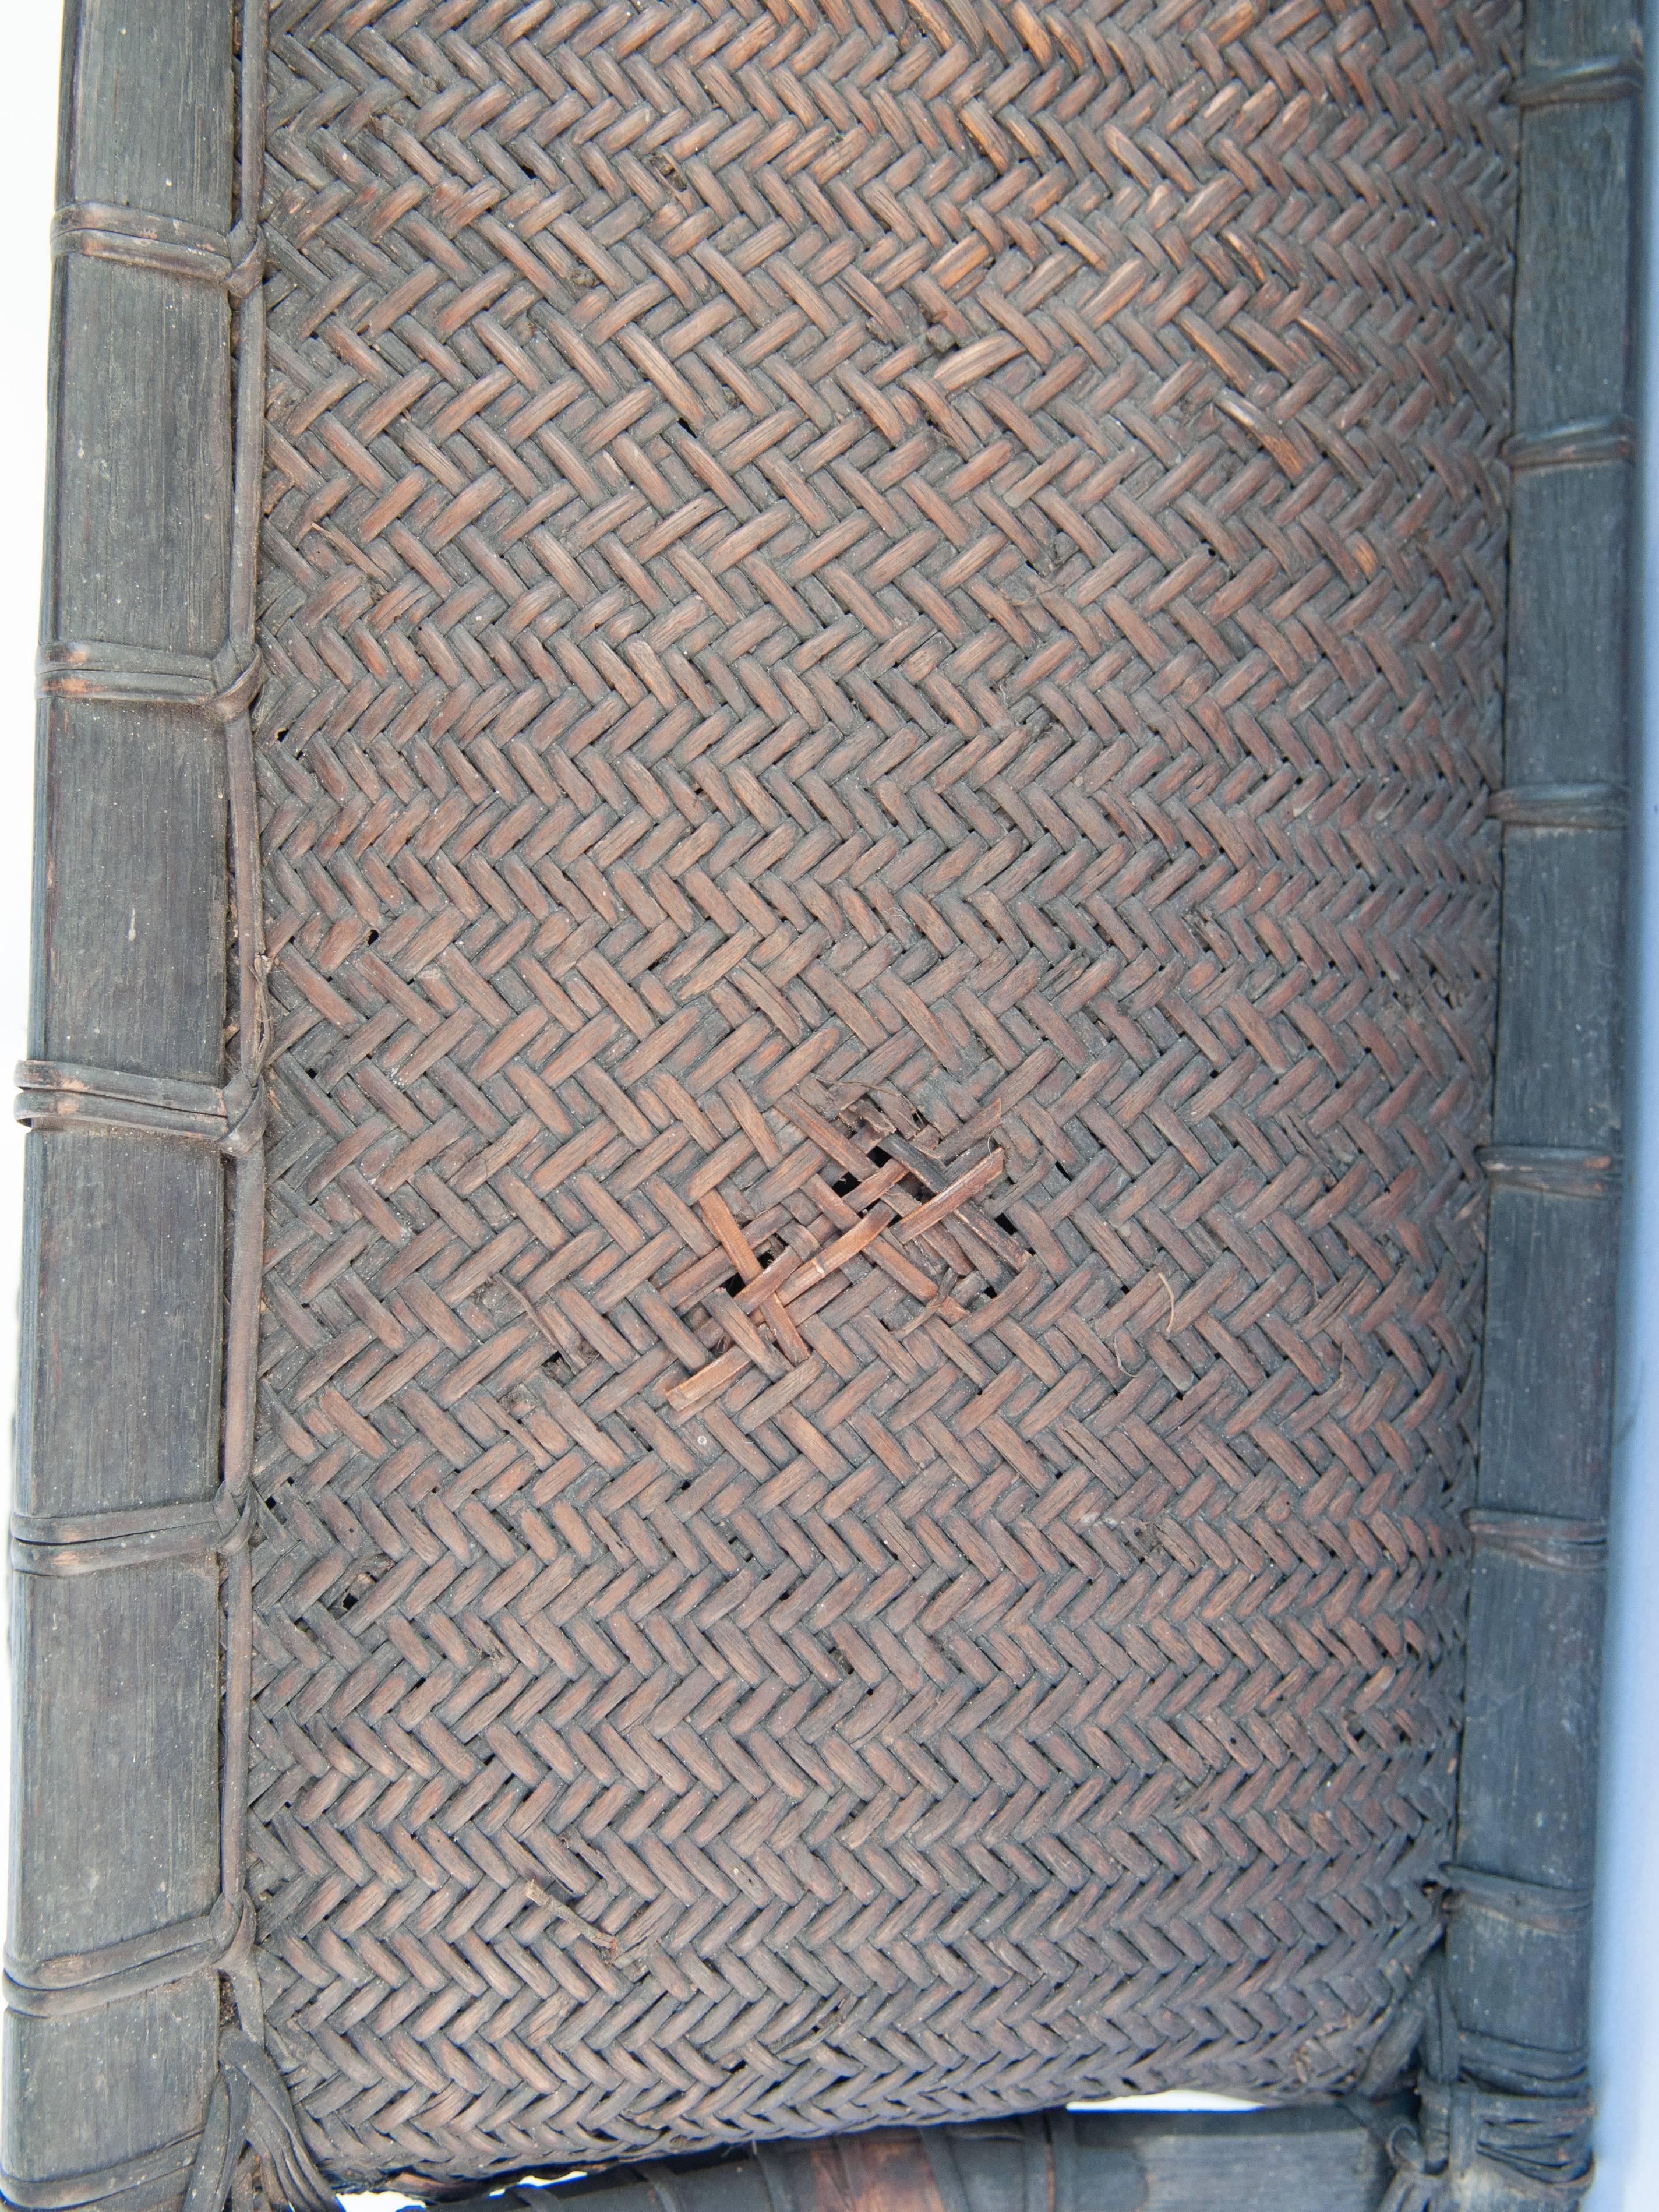 Indonesian Tall Tribal Grain Storage Basket from Borneo, Mid-Late 20th Century